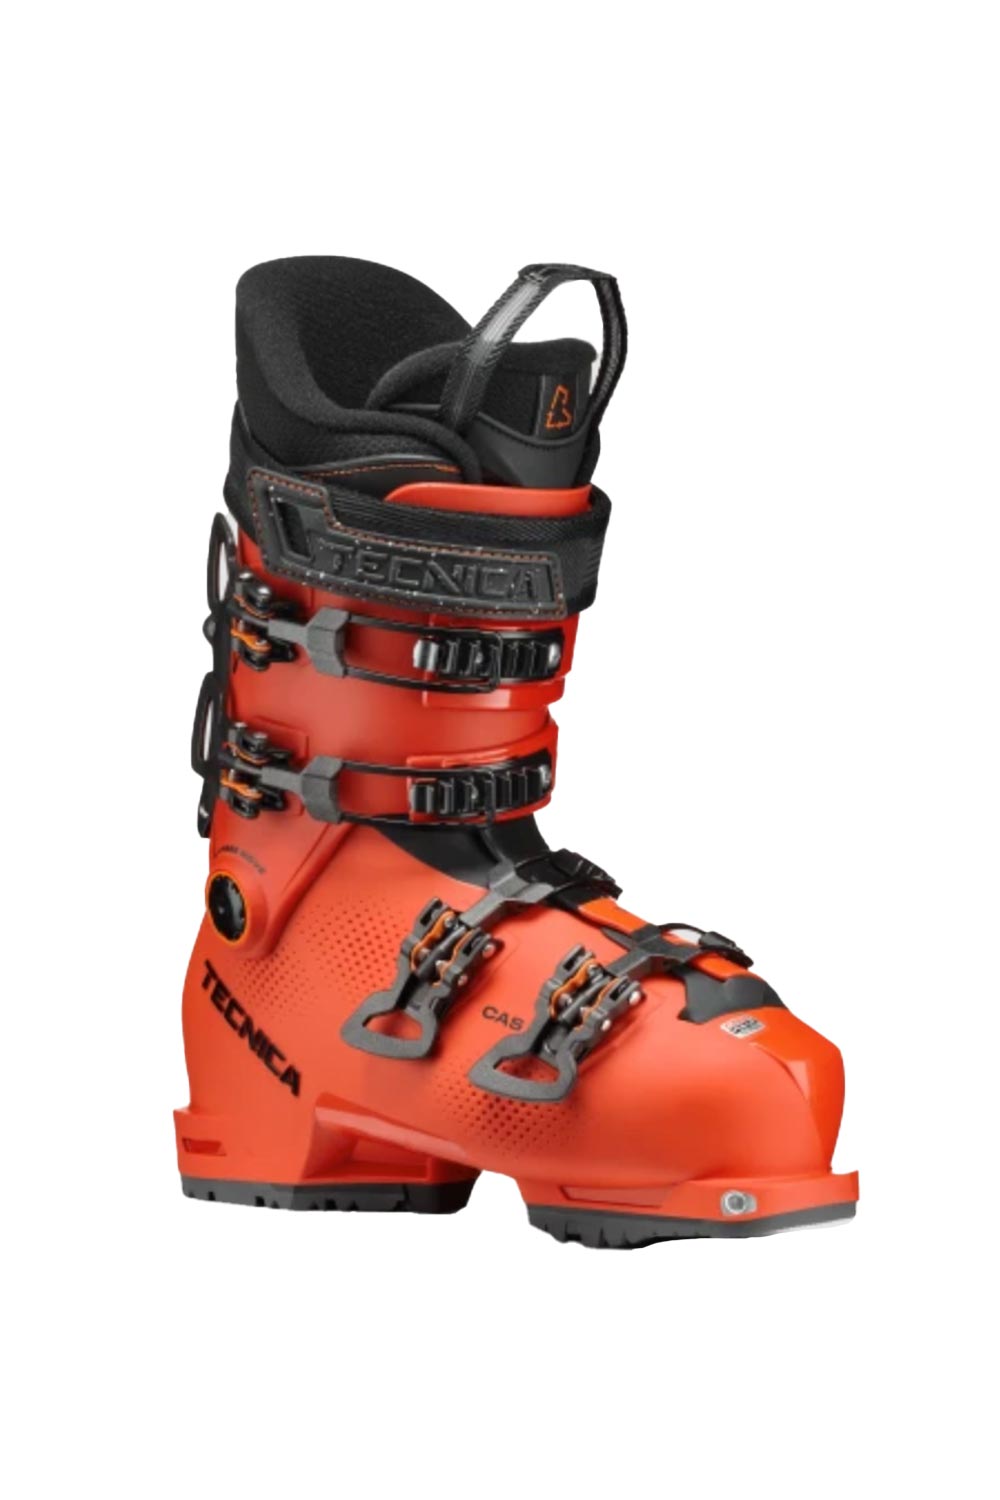 junior downhill ski boots, orange with black buckles & accents